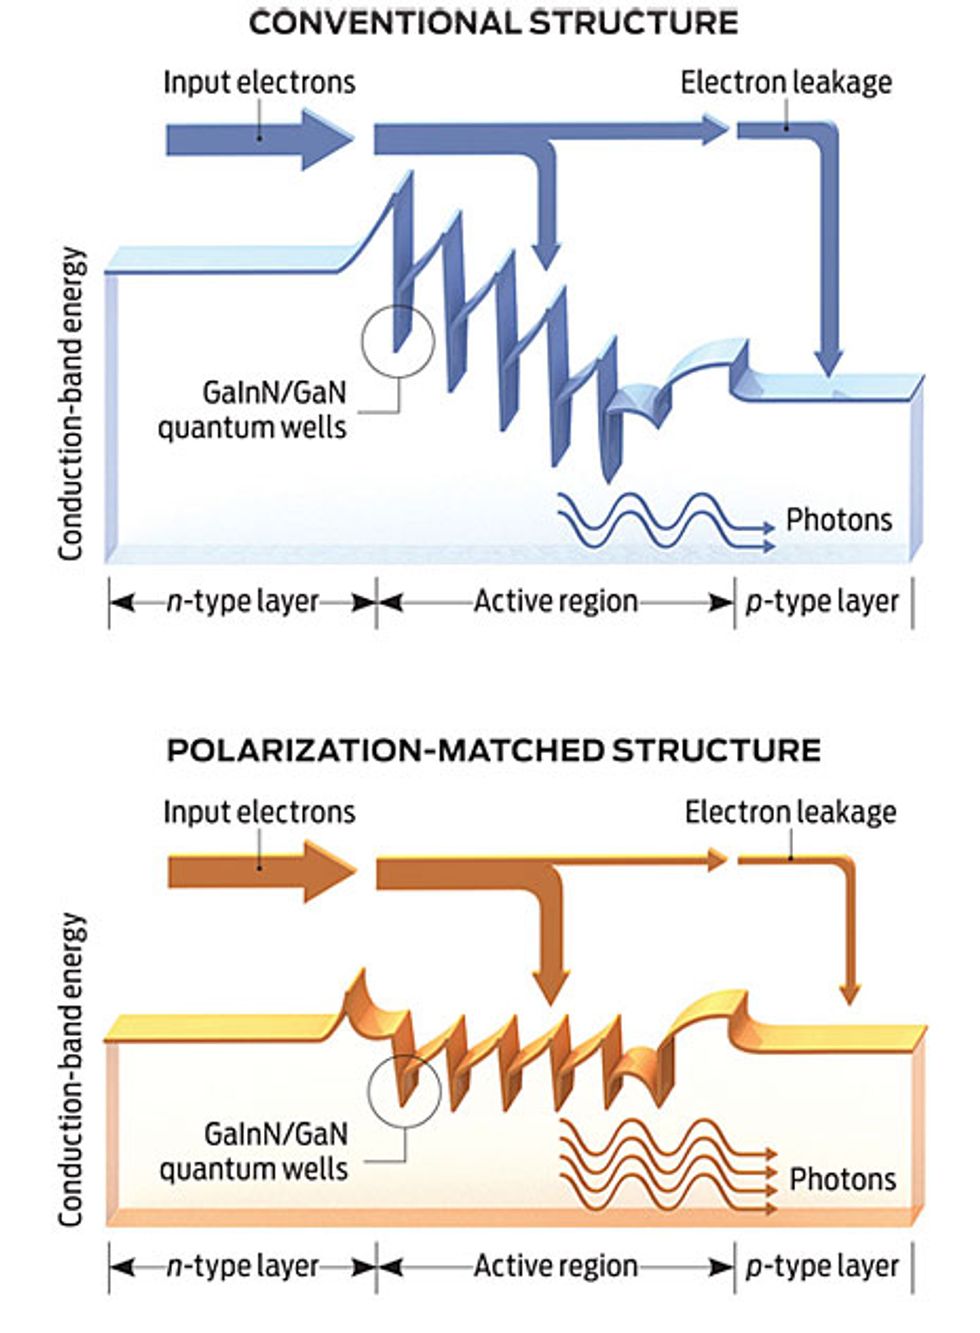 Less Leakage: POLARIZATION FIELDS may cause LED droop